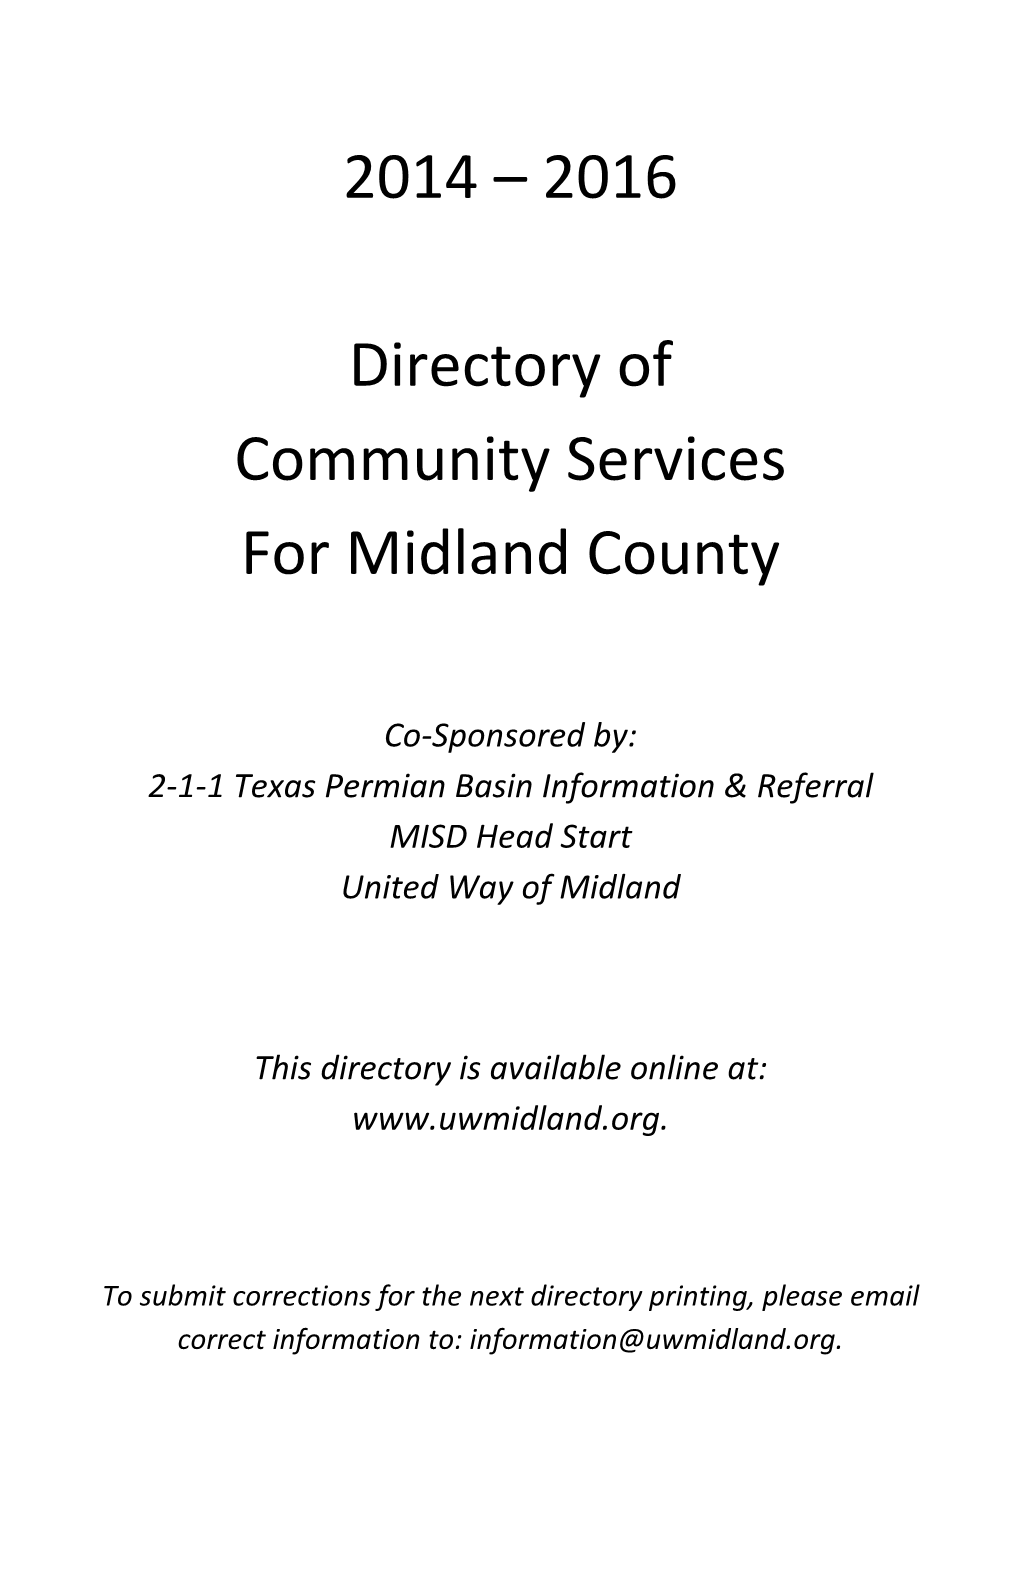 2014 – 2016 Directory of Community Services for Midland County